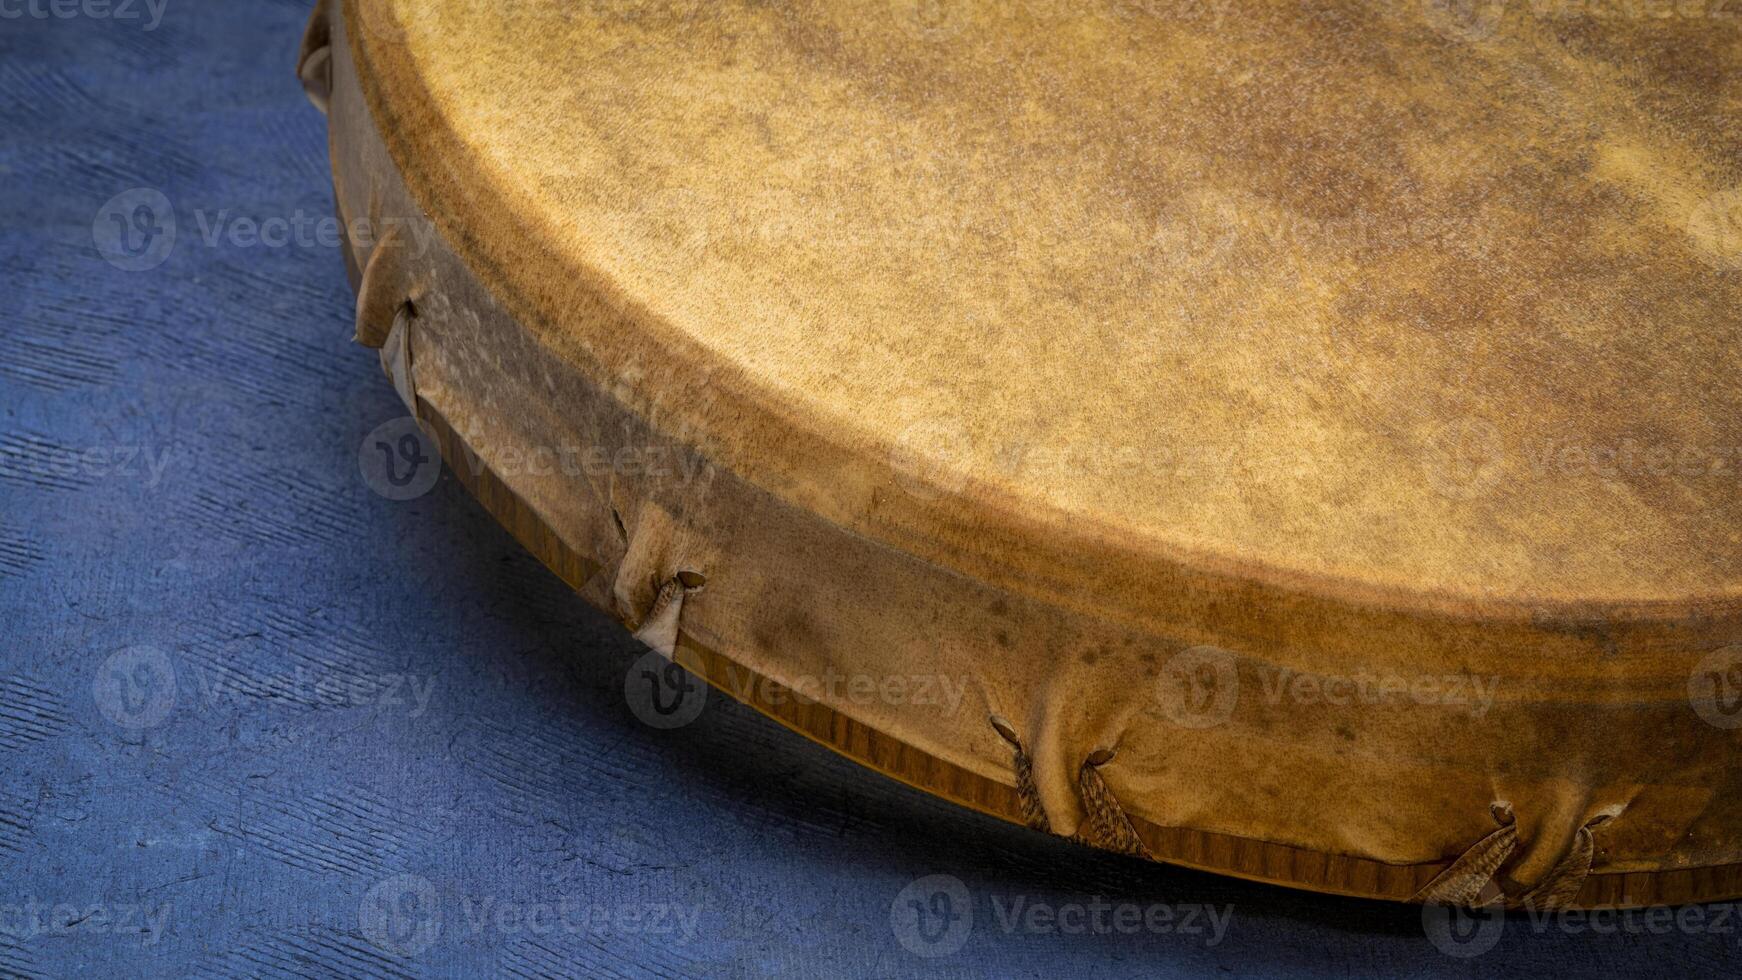 detail of handmade, native American style, shaman frame drum against textured blue paper photo